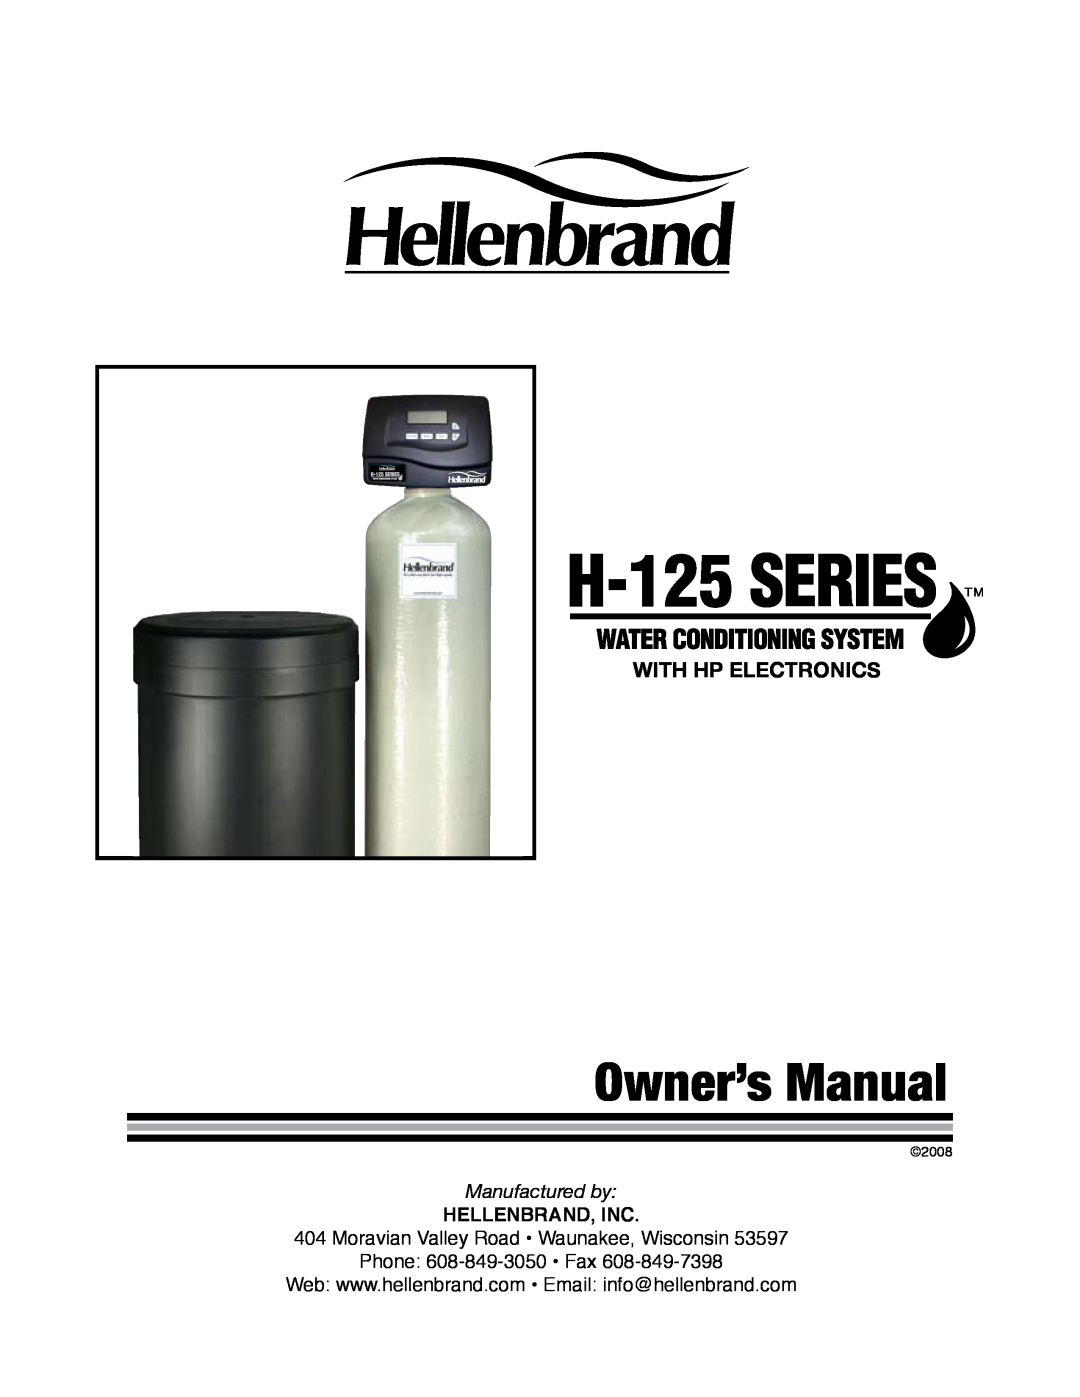 Argosy Research H-125 Series owner manual With Hp Electronics, Hellenbrand, Inc, Owner’s Manual, Manufactured by 